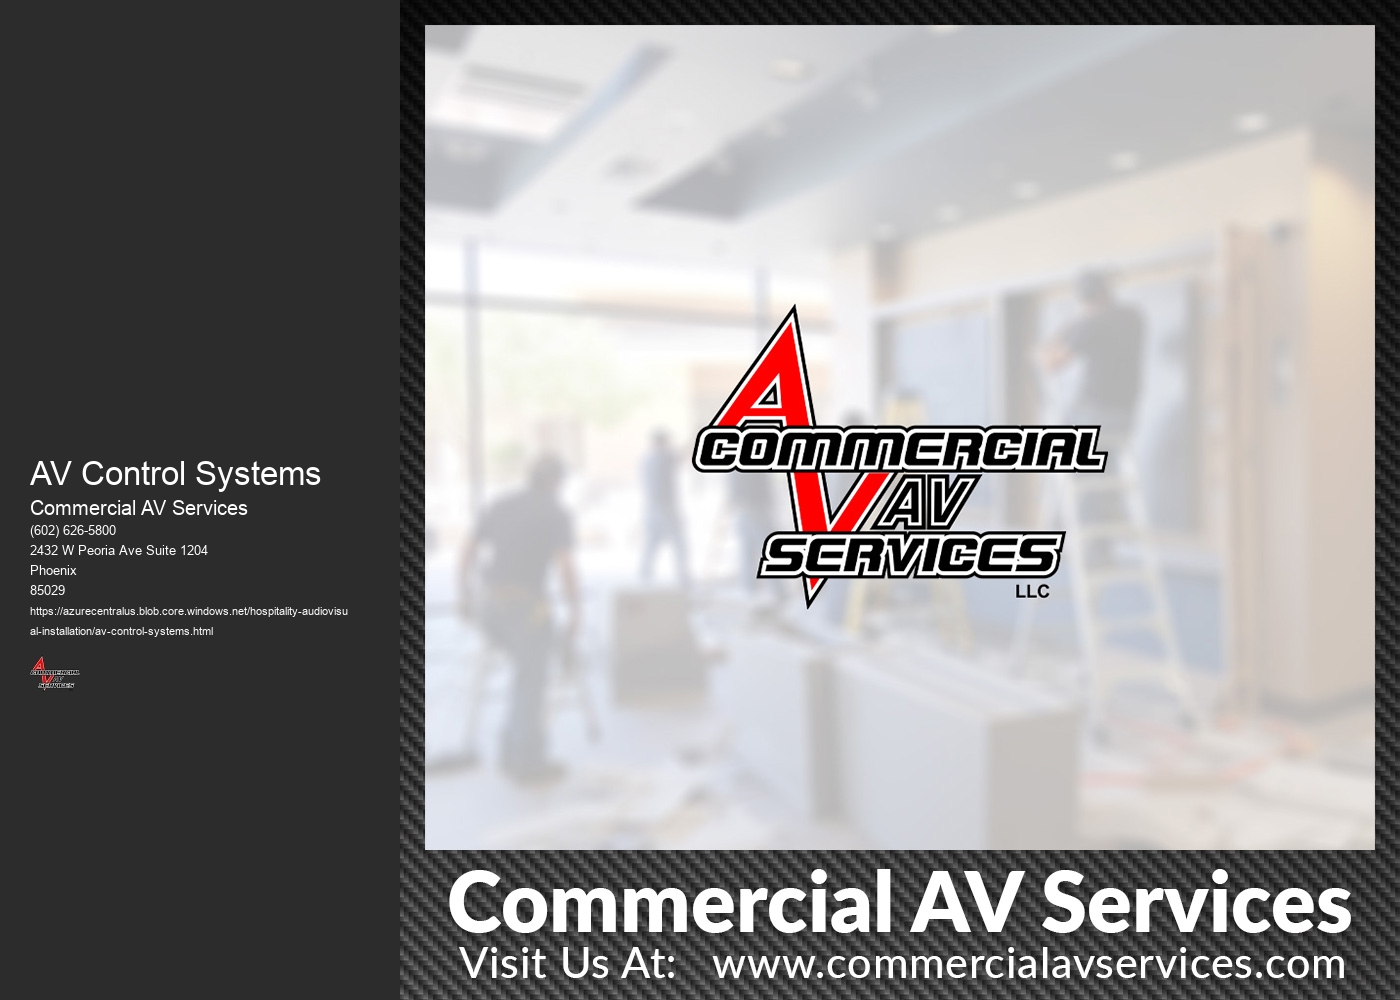 What are the benefits of using an AV control system in a commercial setting?